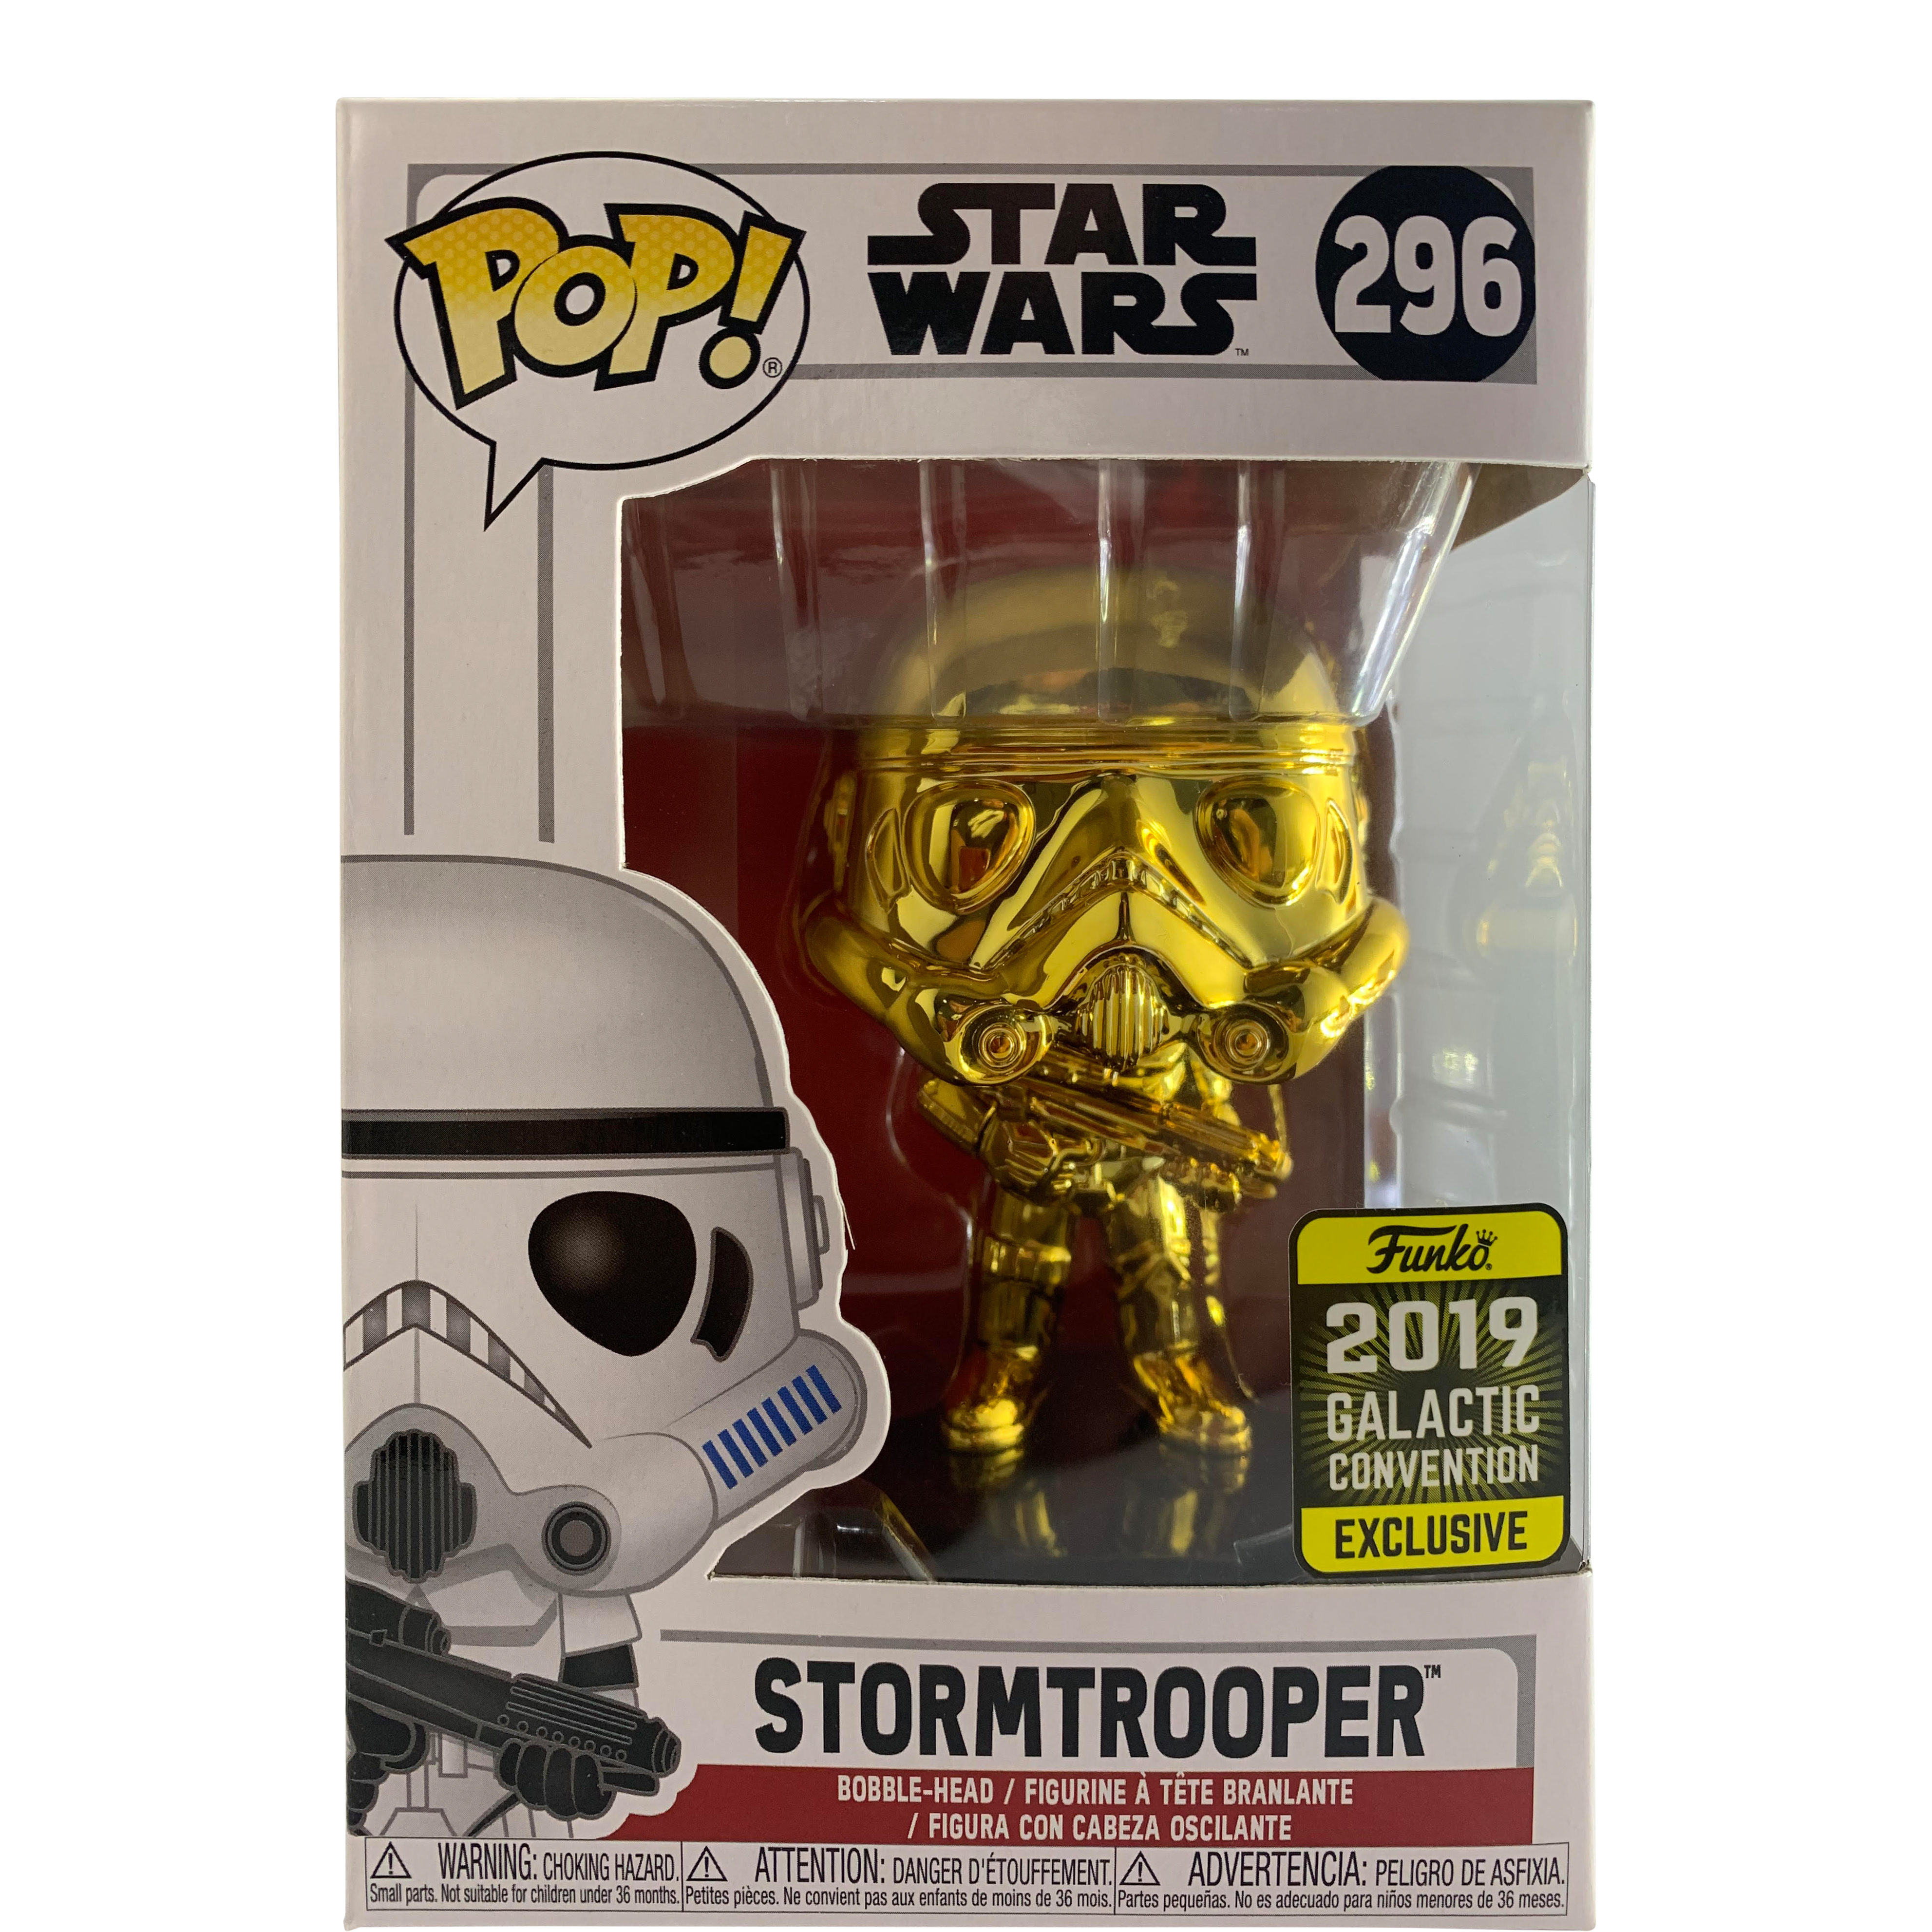 StormTrooper #296-2019 Galactic Convention Exclusive NEW Star Wars Funko Pop 